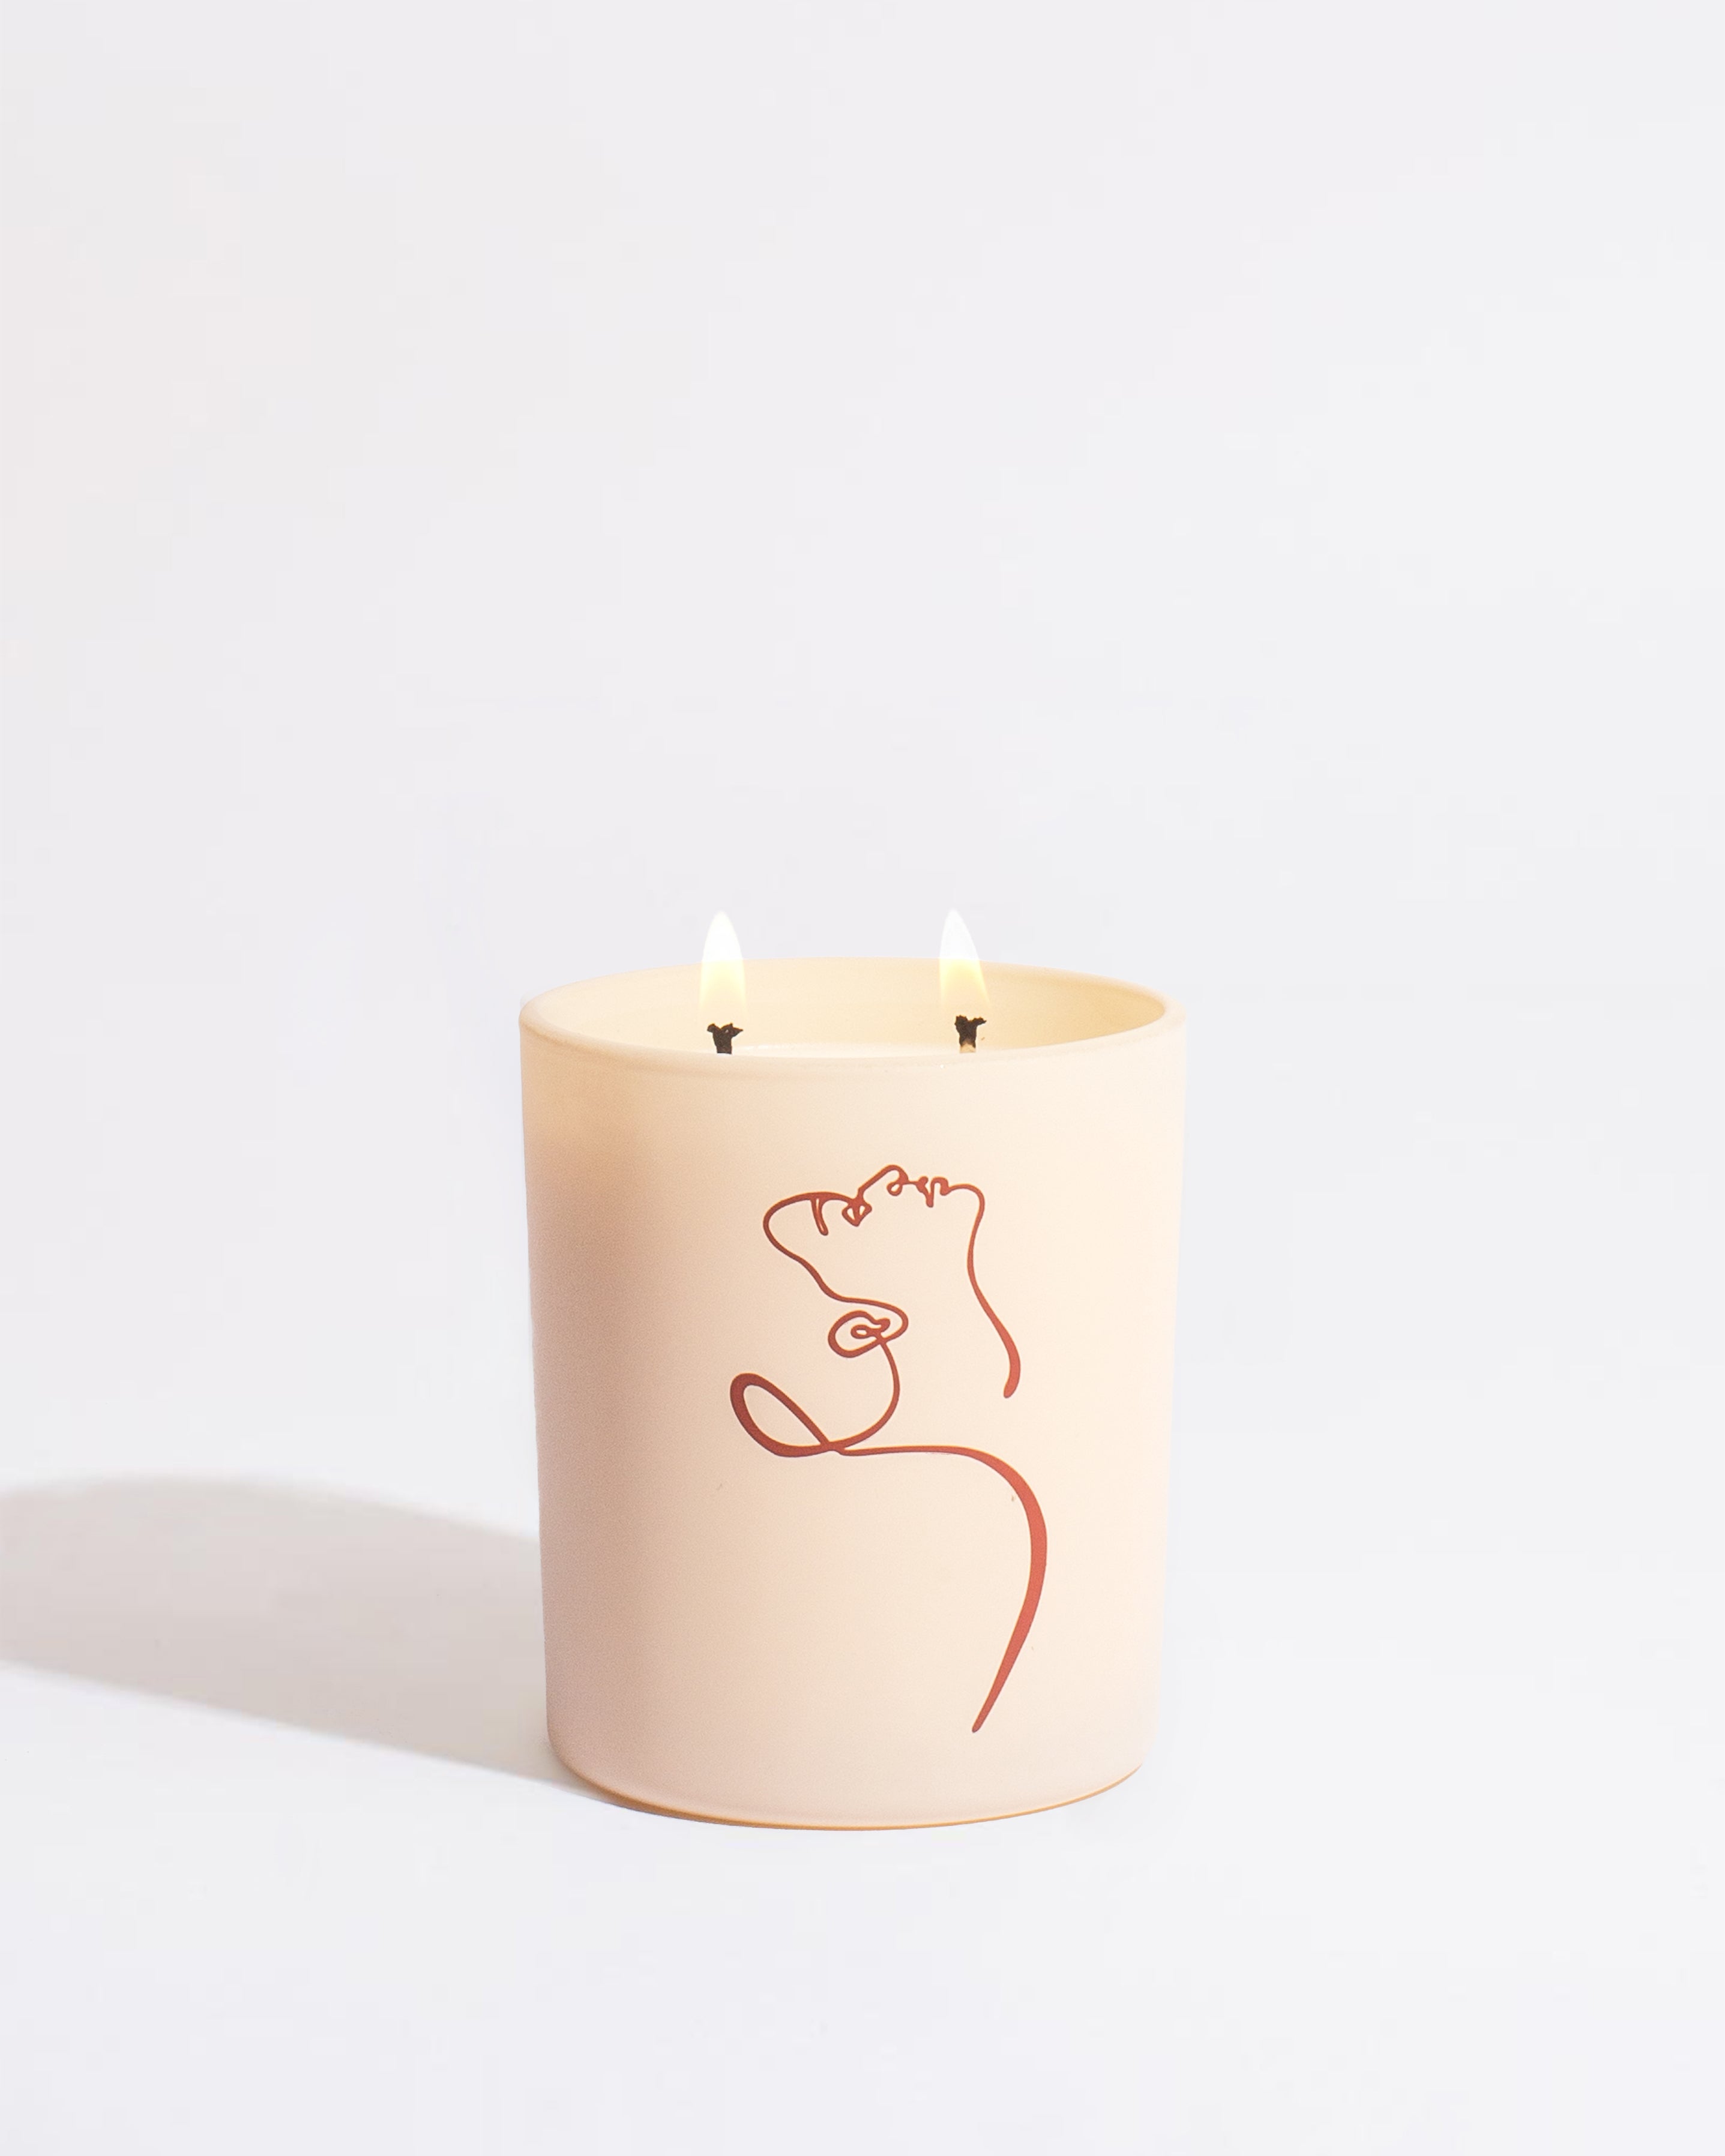 A beige candle with two wicks burning softly from the Petrichor - Allison Kunath Artist Edition Candle by Brooklyn Candle Studio sits elegantly. The candle holder features a minimalist red line drawing of a woman's face and upper body, all against a plain white background.